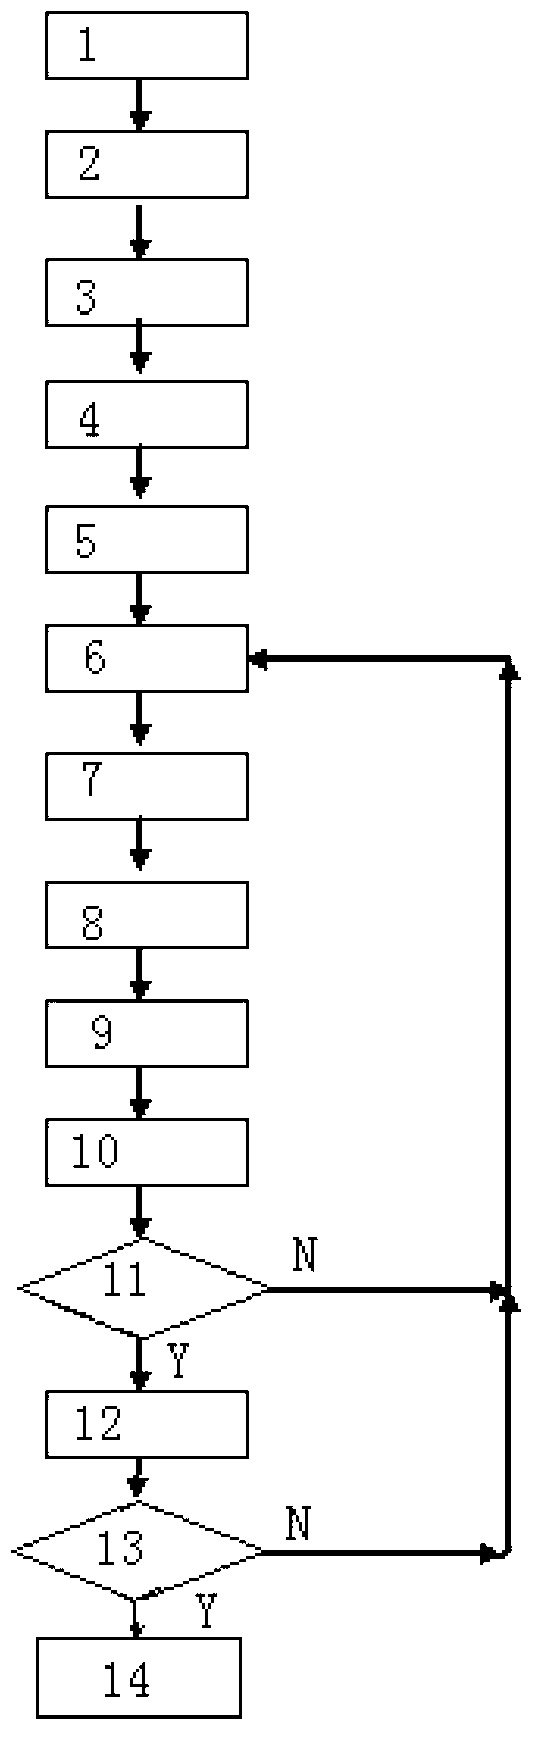 Complicated function maximum and minimum solving method by means of parallel artificial bee colony algorithm based on computer cluster